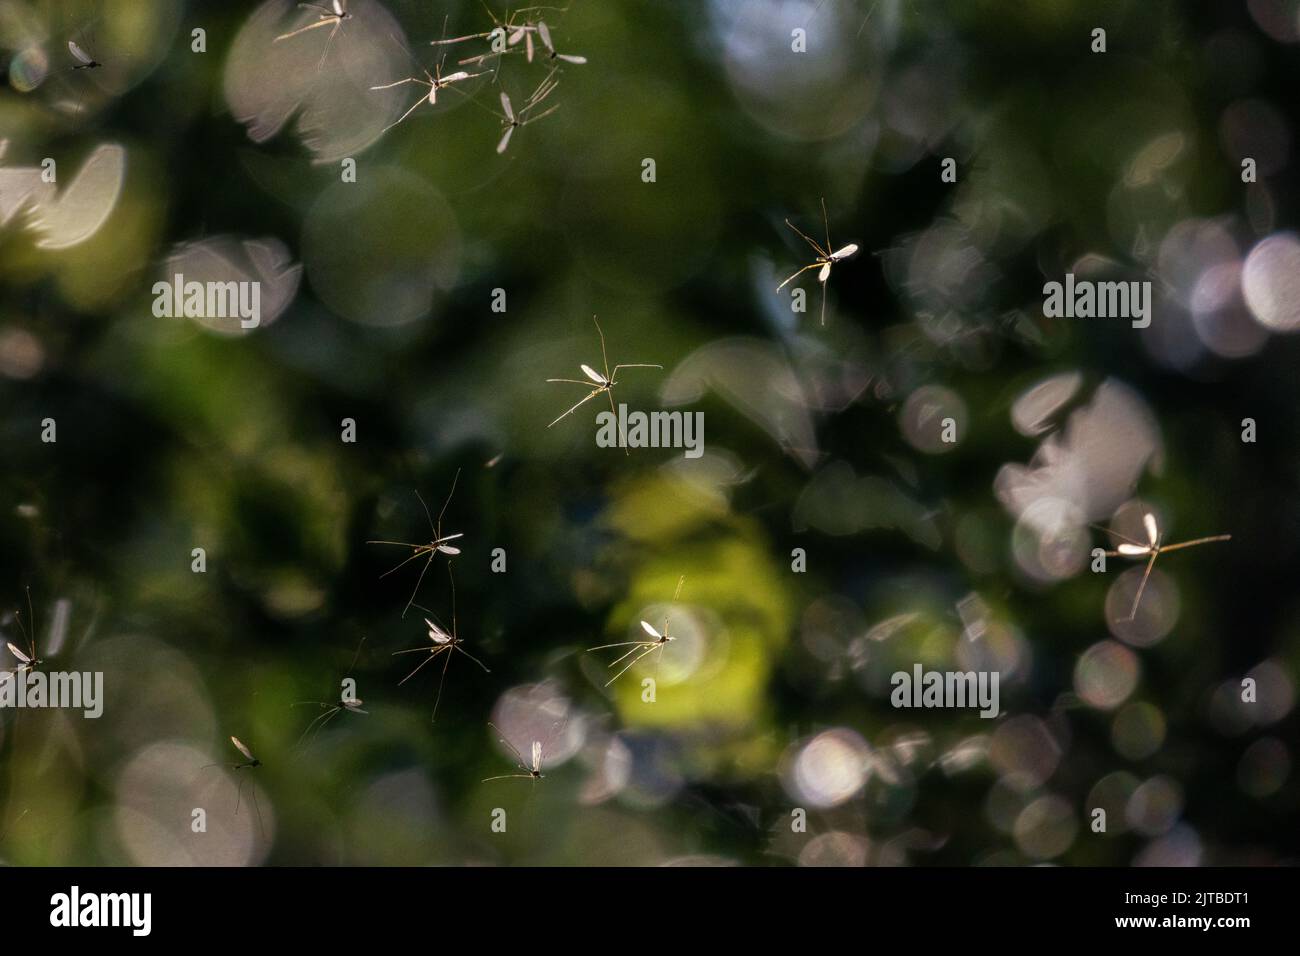 A swarm of mosquitoes or winter gnats, catching the light in trees, against a bokeh background, West Yorkshire, England, UK wildlife Stock Photo